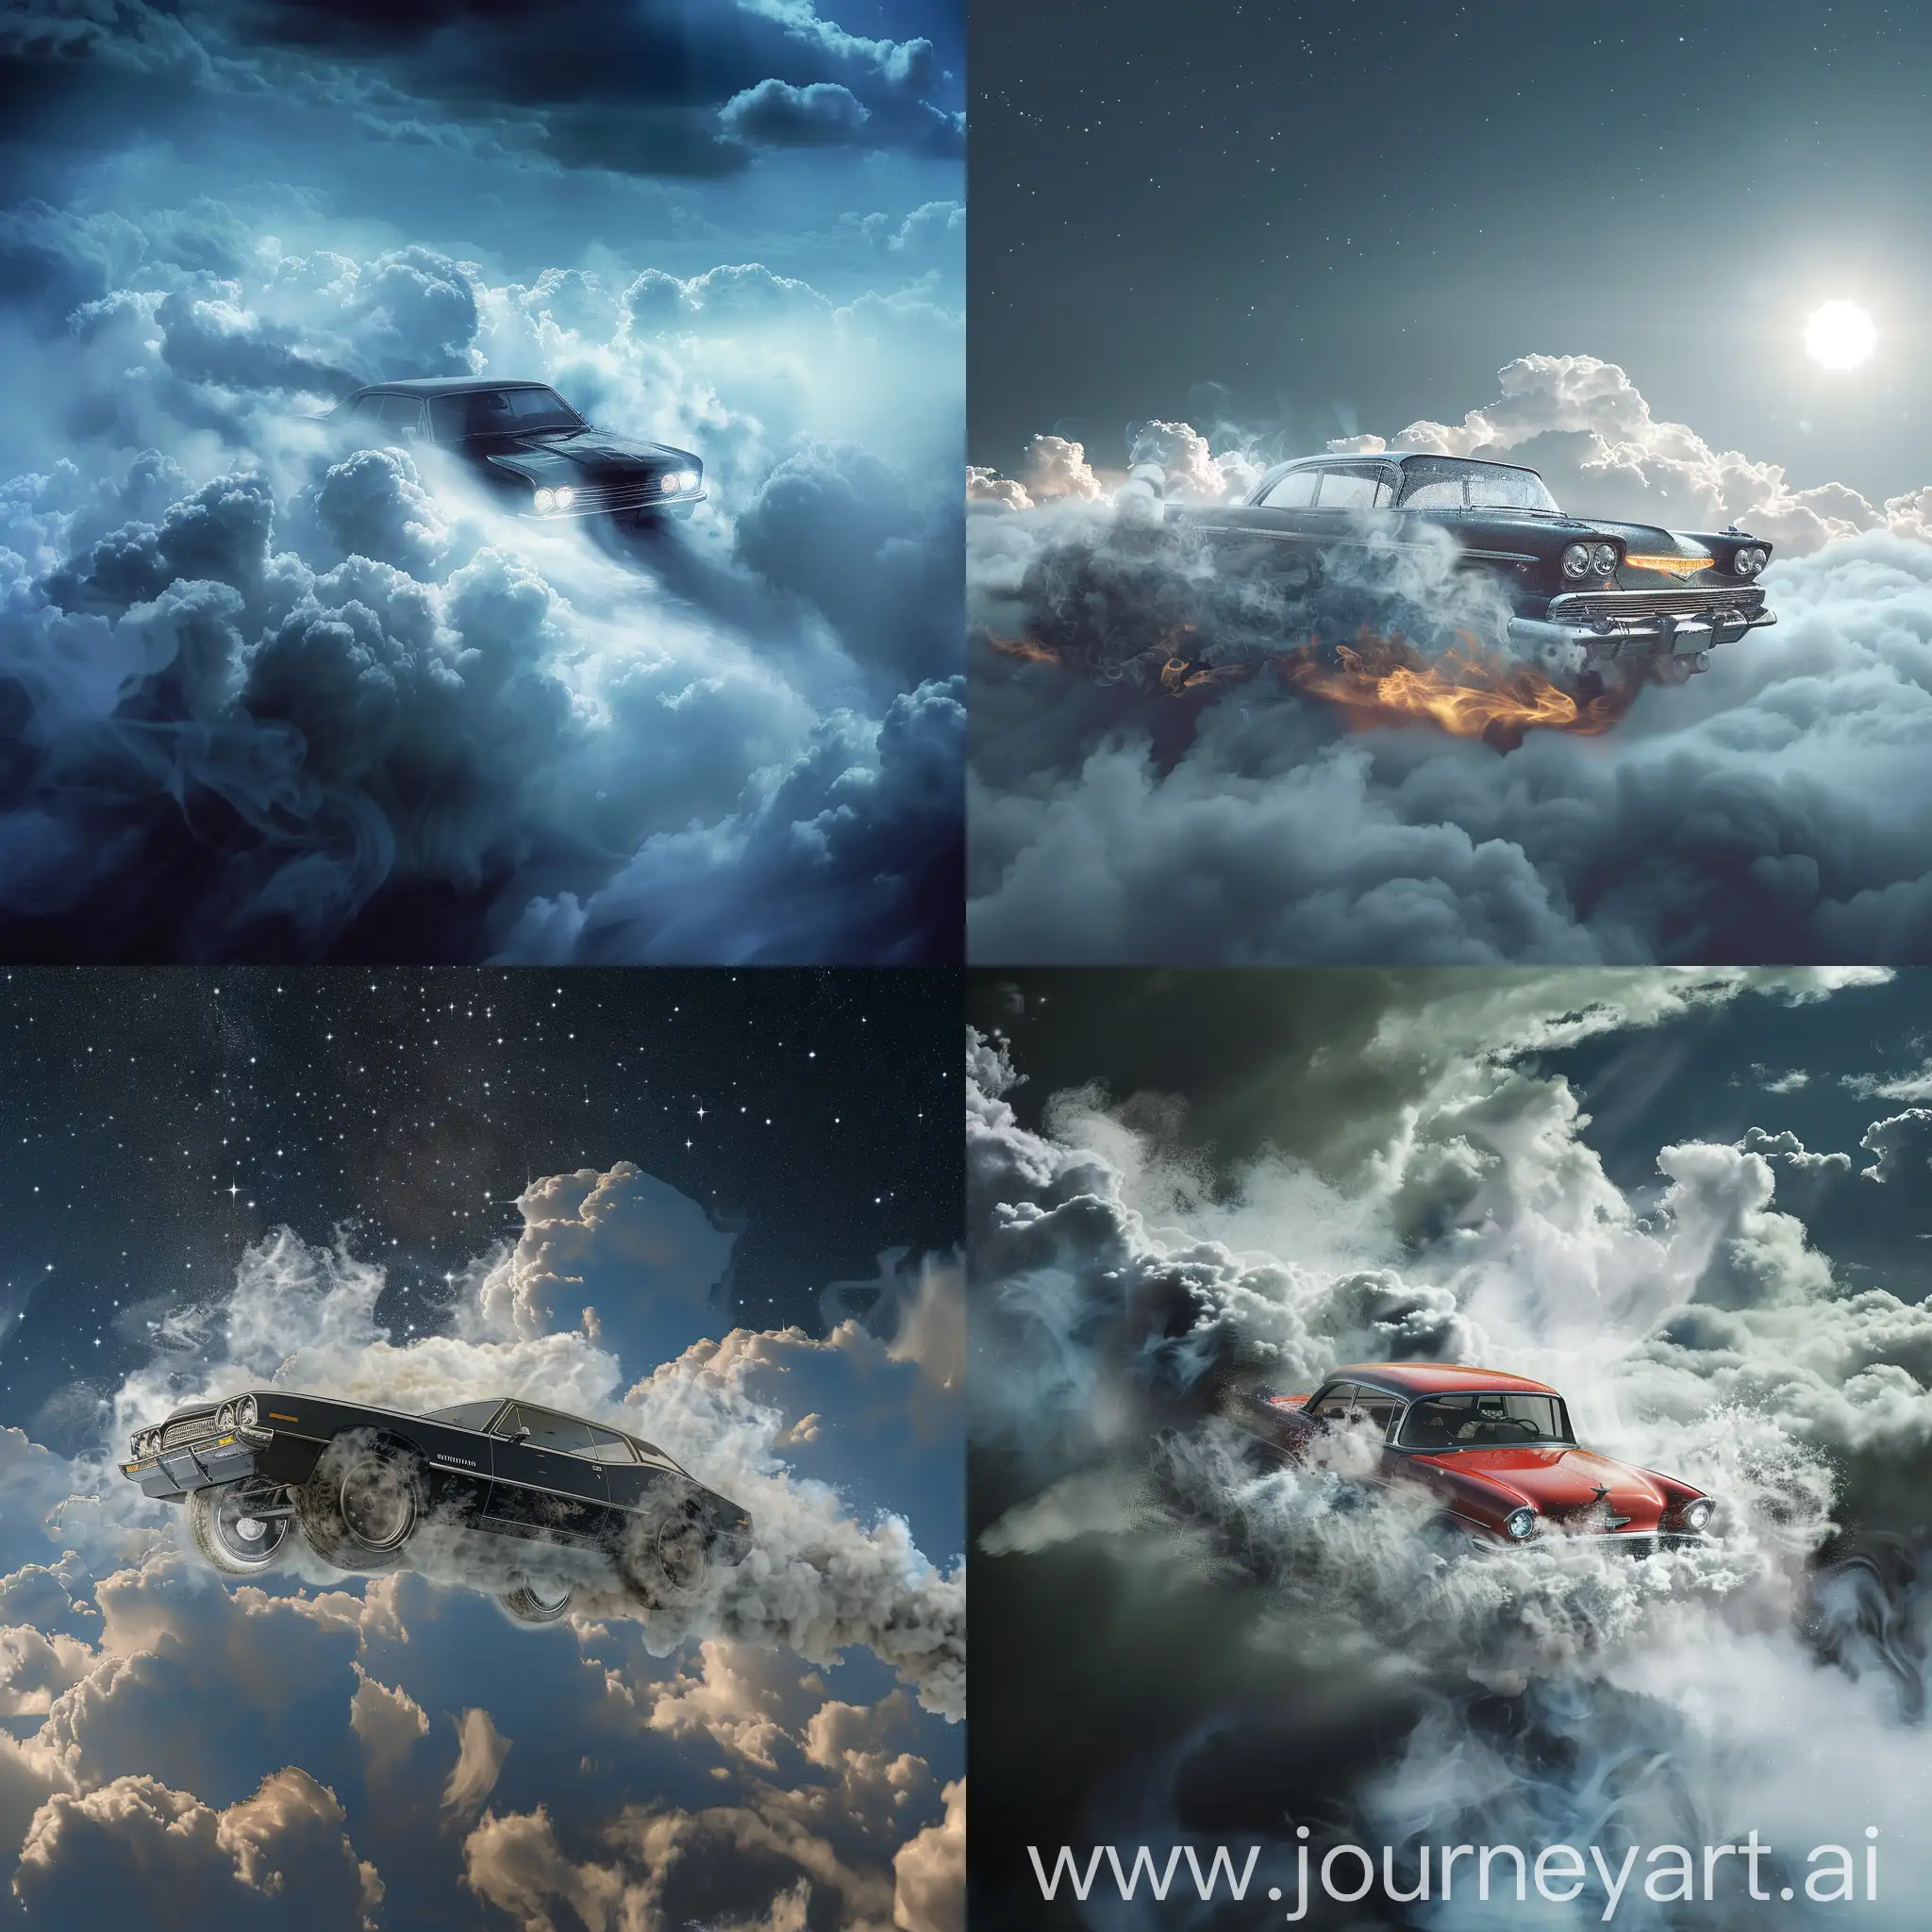 Heavenly-Car-Emitting-Smoke-with-Wheels-Descending-from-Above